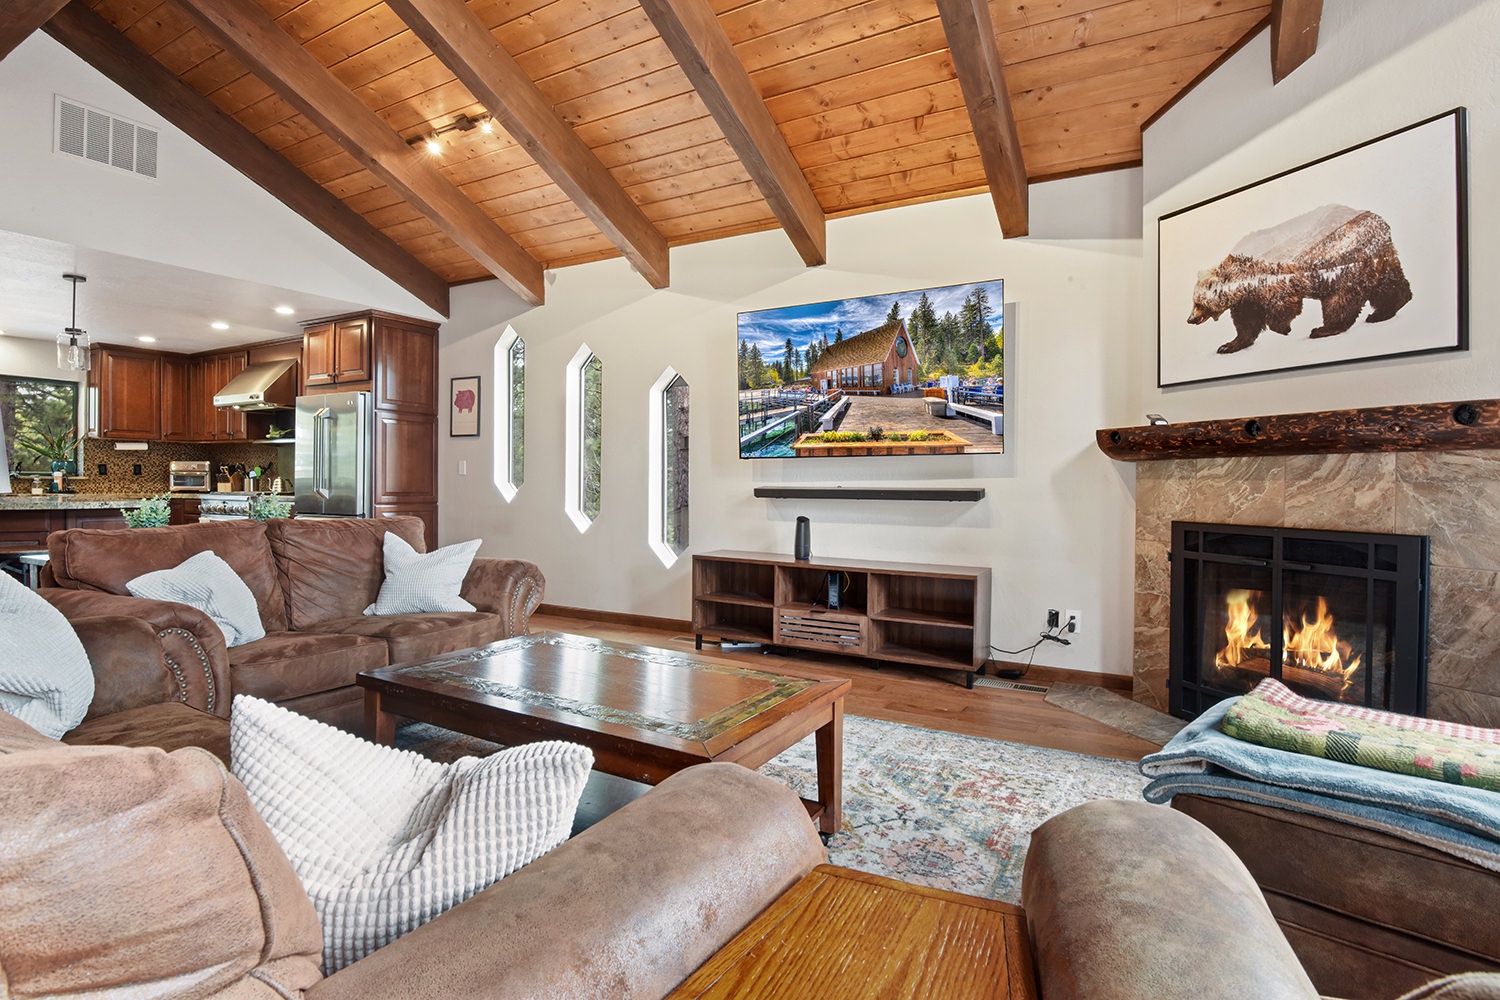 Large open living space with TV, fireplace, and deck access